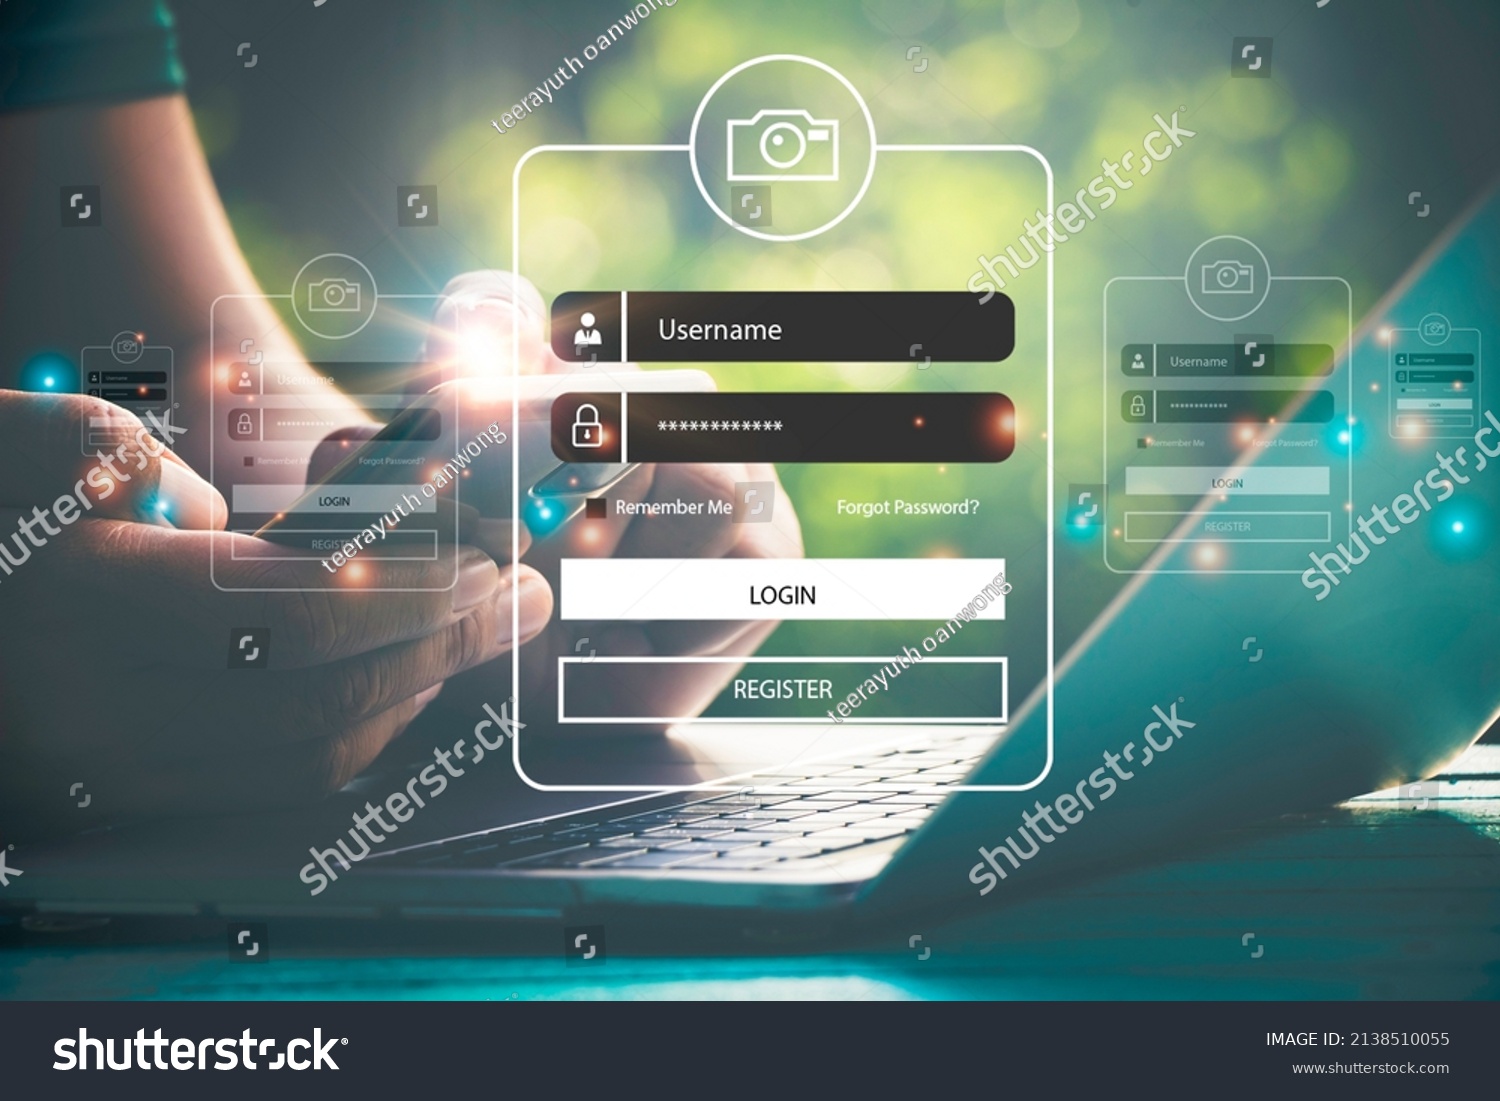 User typing login and password.Hand man use mobile phone for  log in to enter login and password.sign in page,User profile,Information privacy,Internet.photo Cyber protection and technology concept. #2138510055